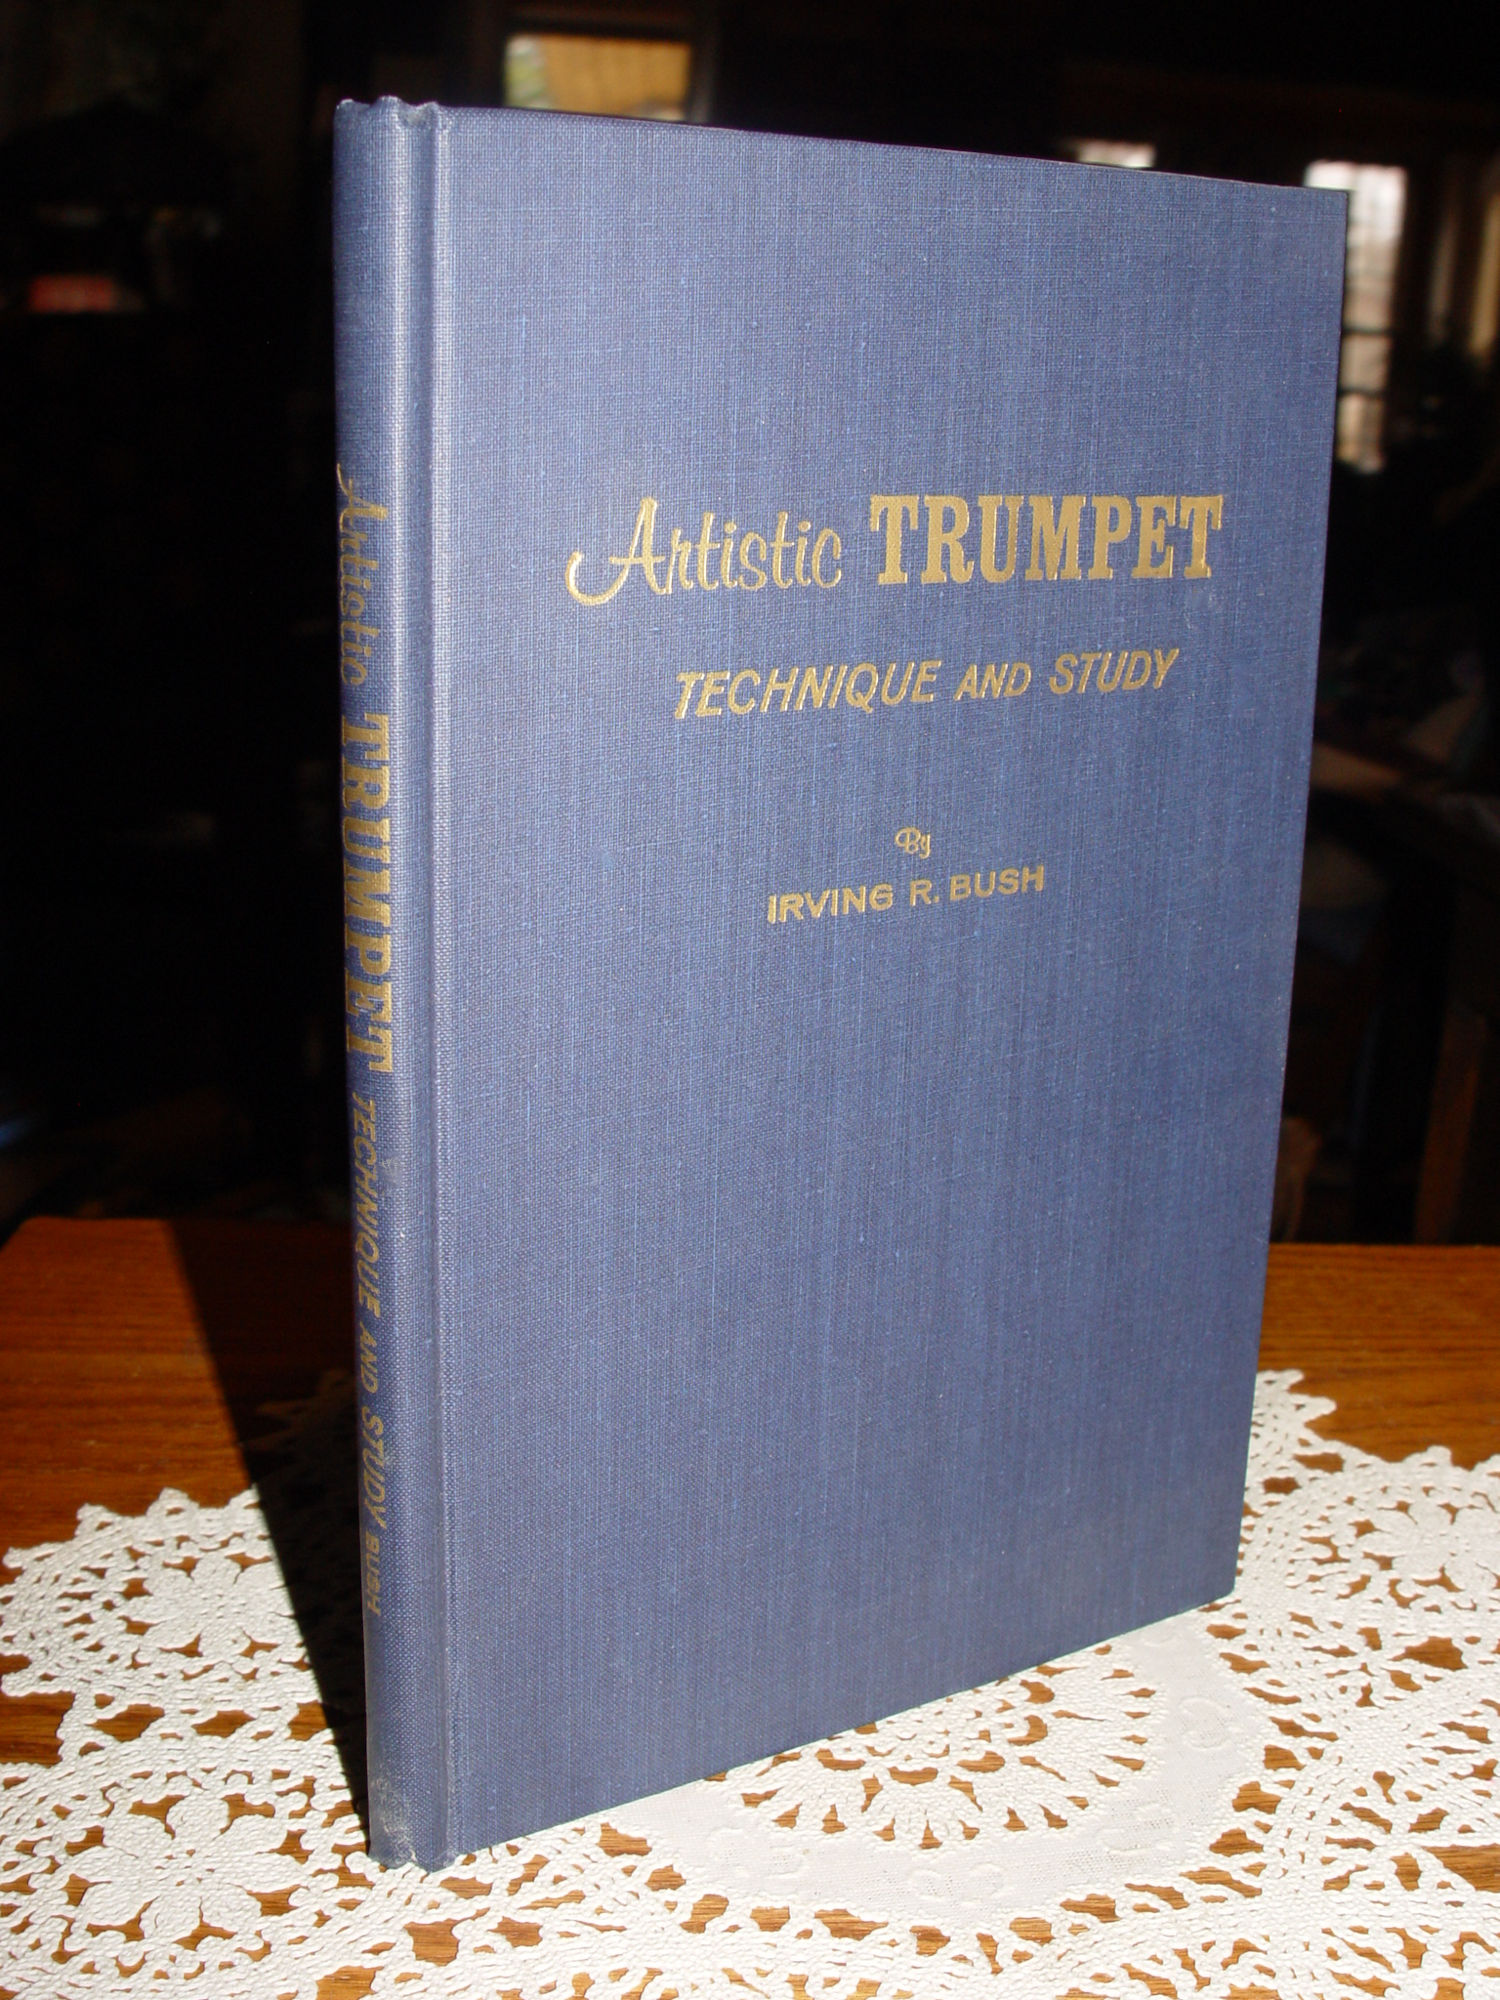 Artistic Trumpet: Technique and Study 1962
                        by Irving R. Bush